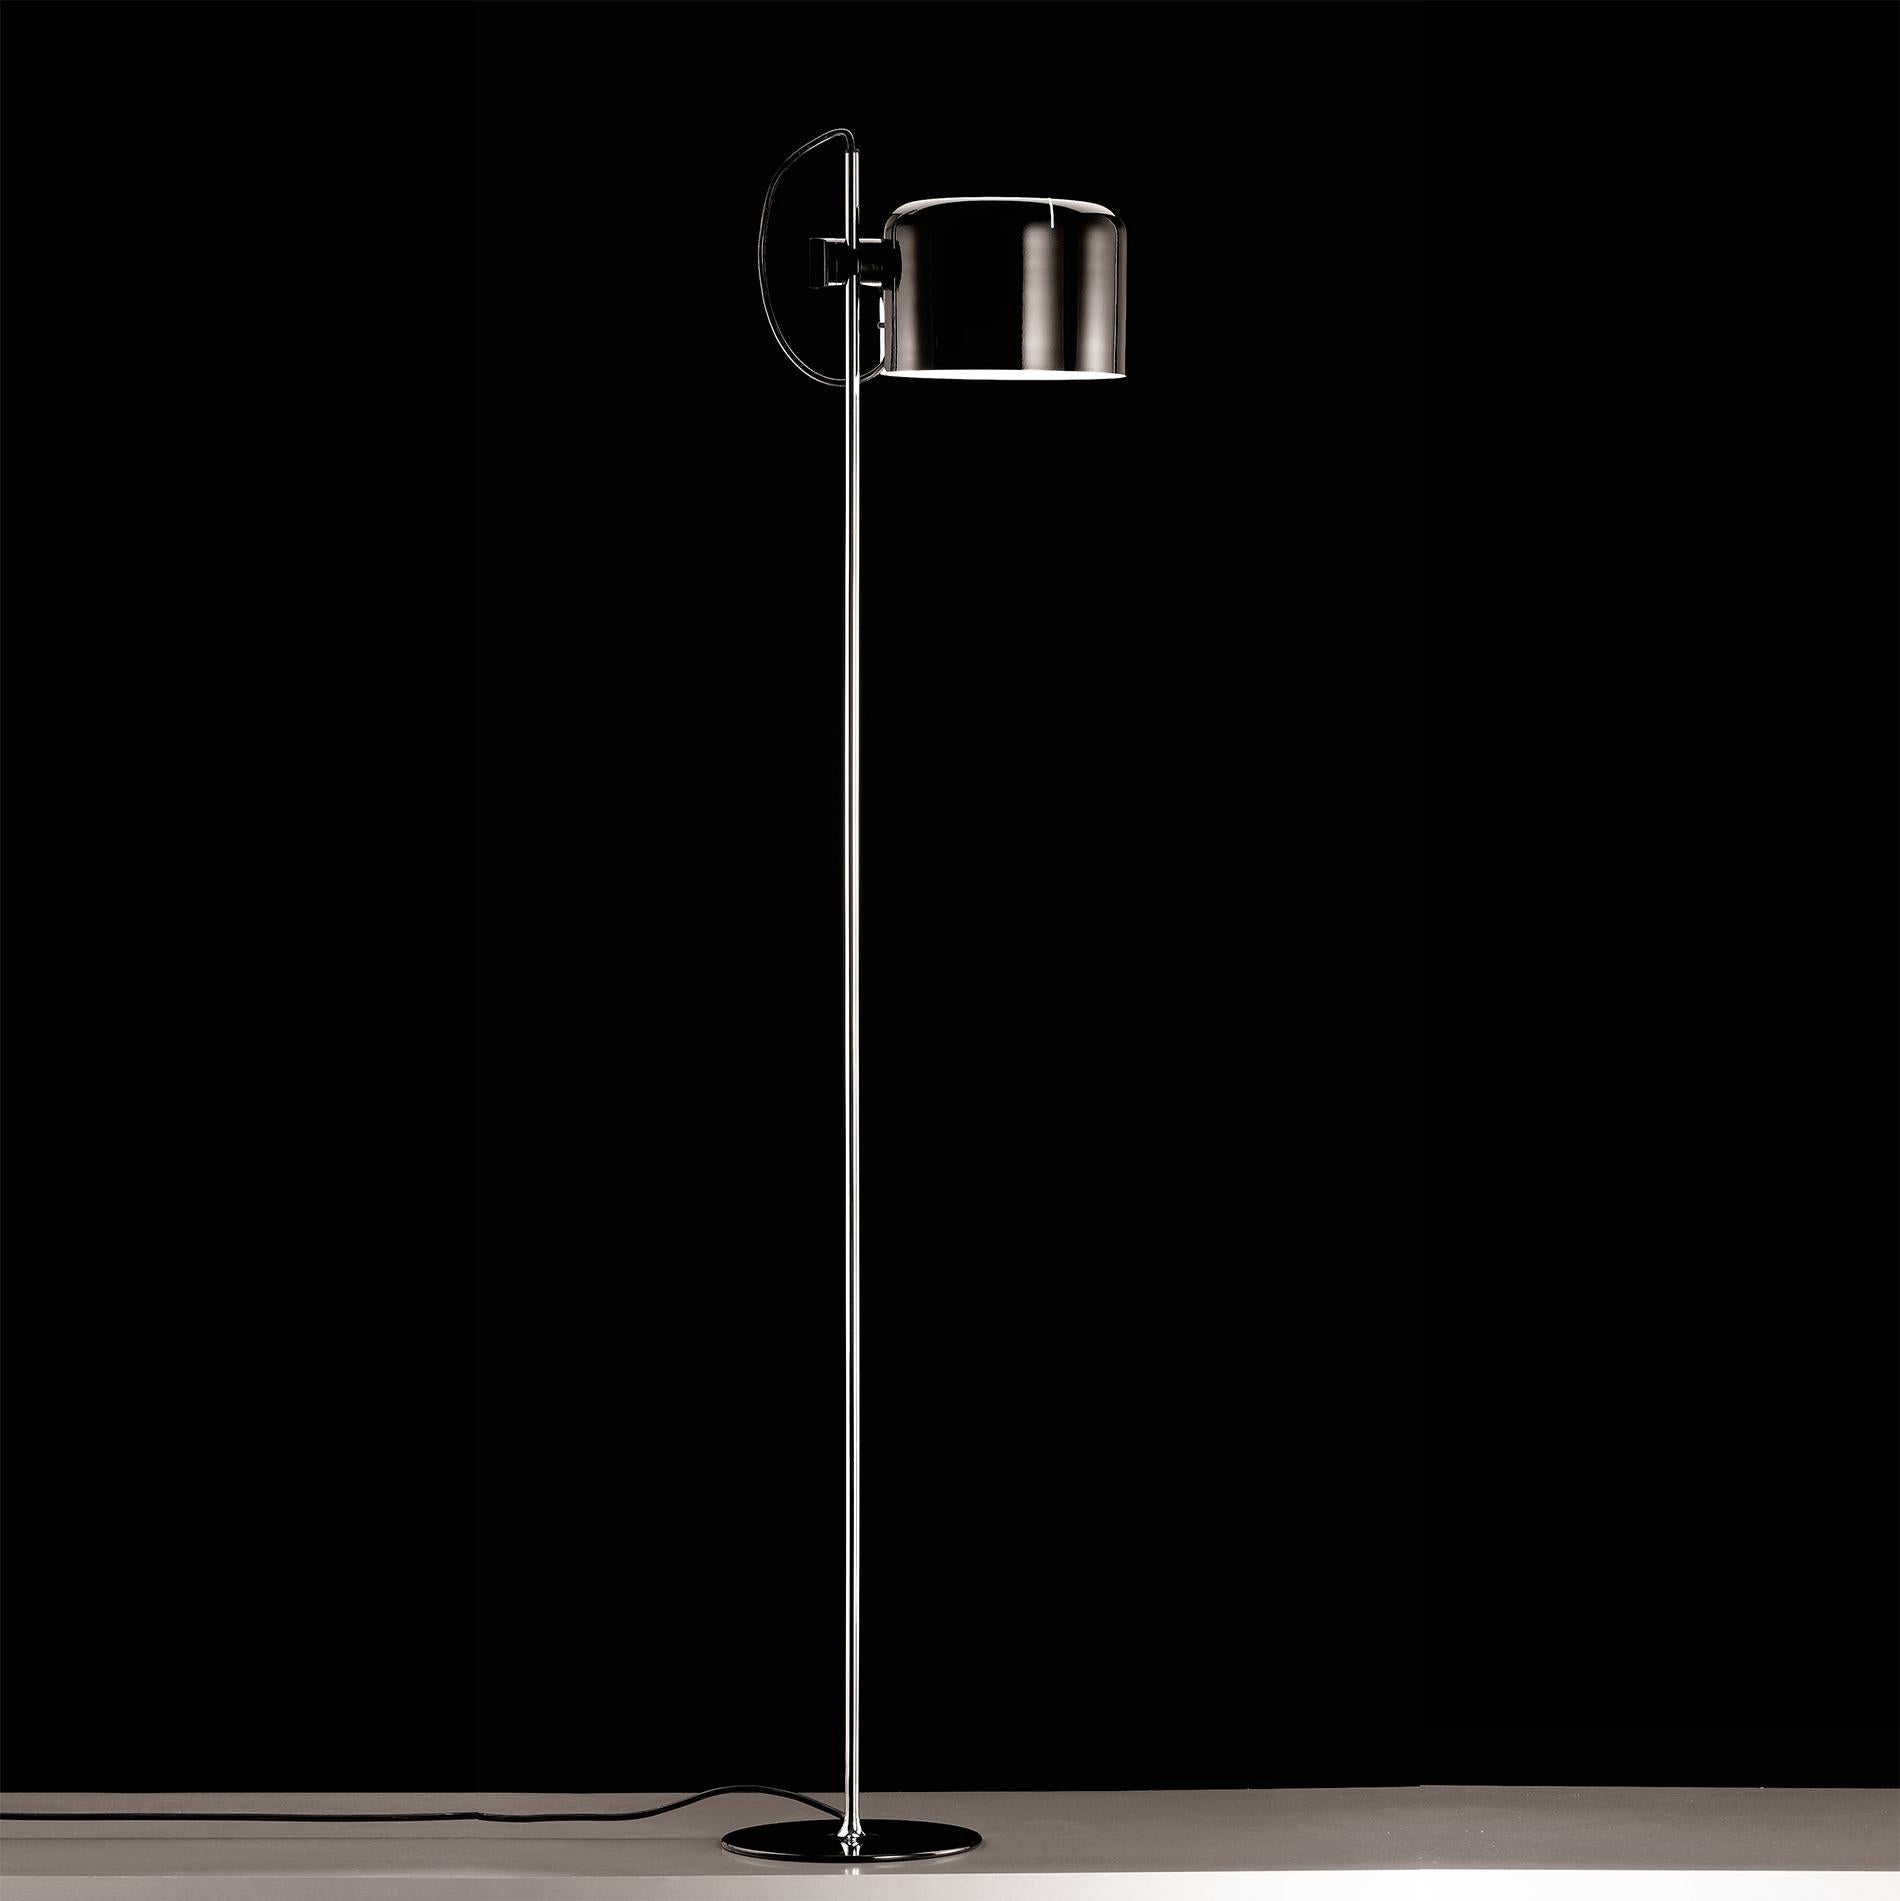 Floor lamp 'Coupé' designed by Joe Colombo in 1967.
Floor lamp giving direct light, lacquered metal base, chromium-plated stem, adjustable reflector in lacquered aluminium. Manufactured by Oluce, Italy.

The Coupé series, designed by Joe Colombo,